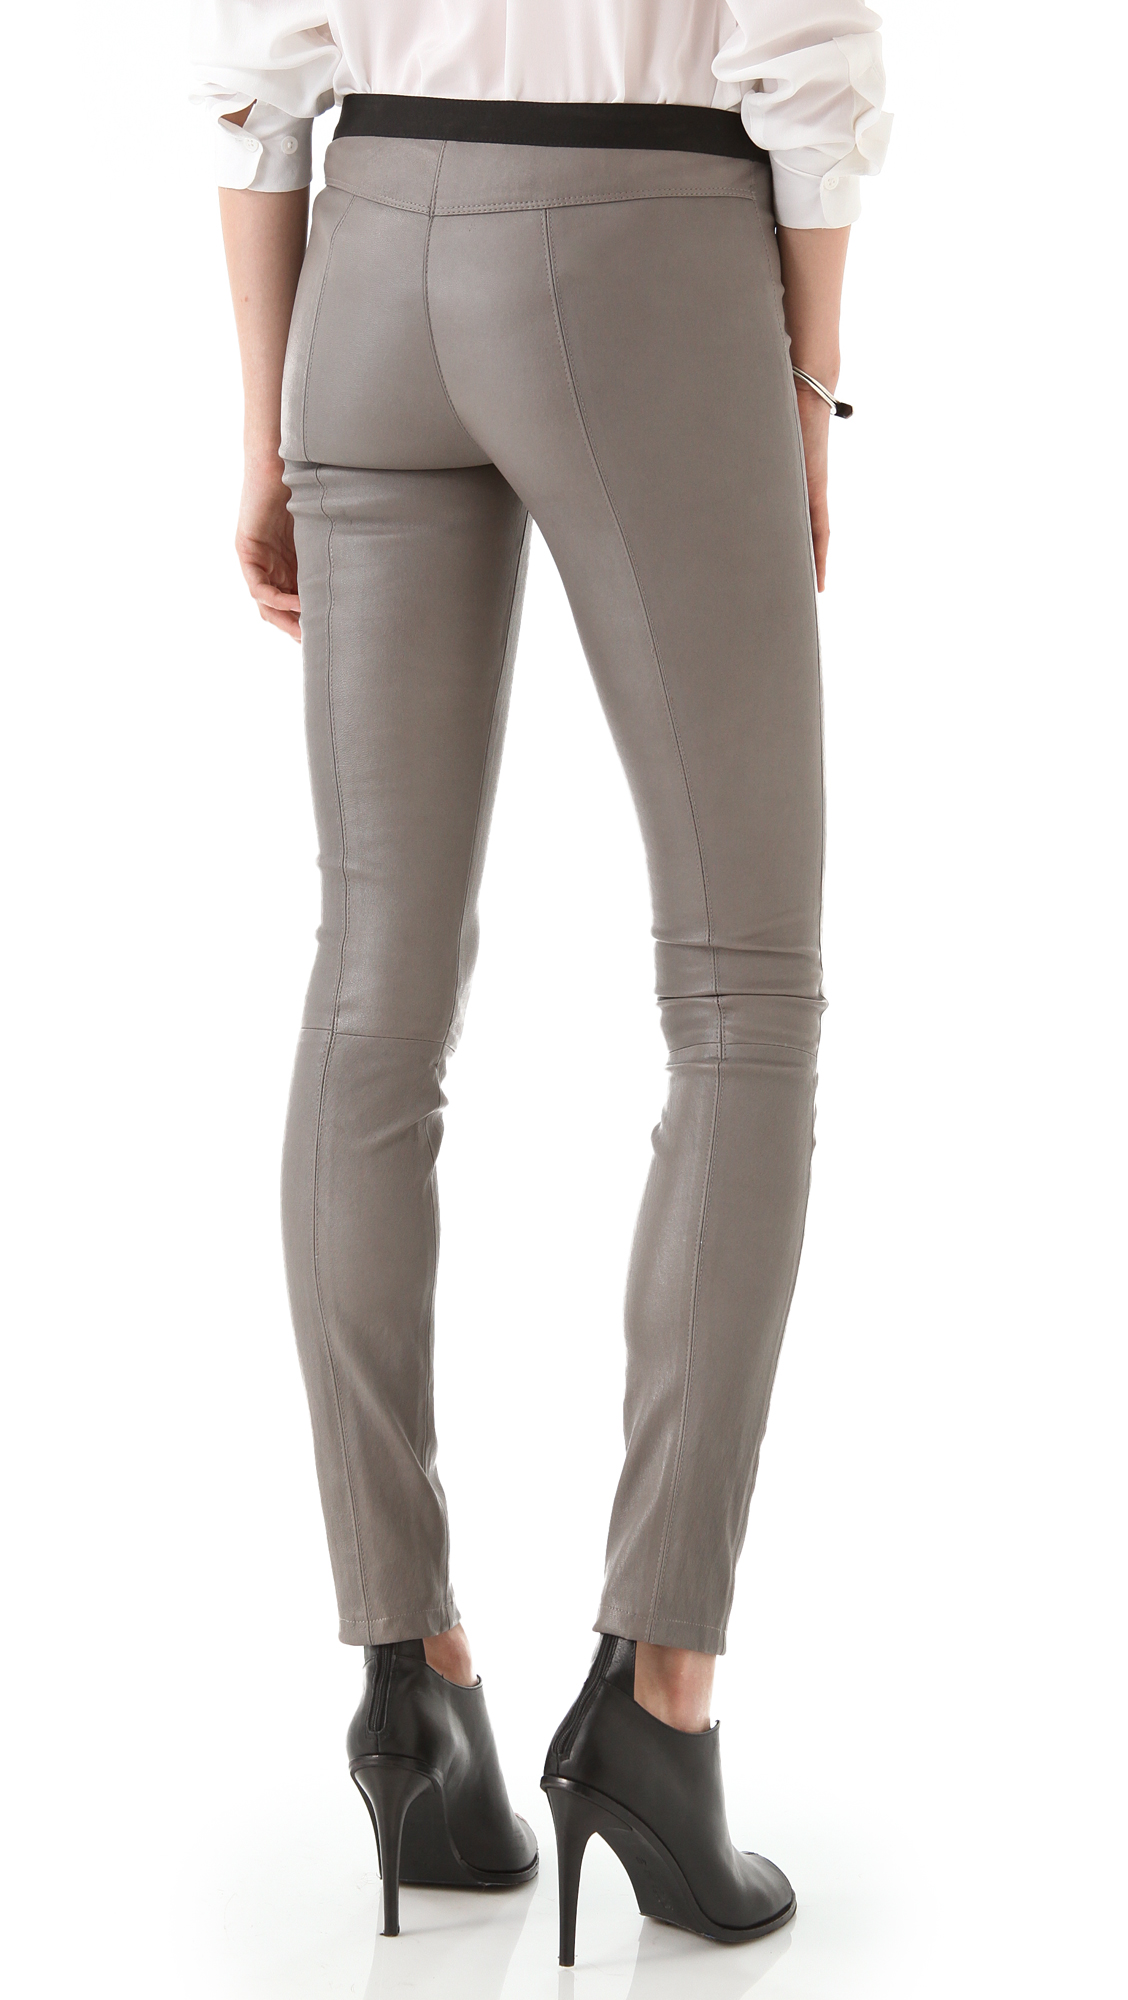 Lyst - Theory Ima Leather Pants in Gray1128 x 2000